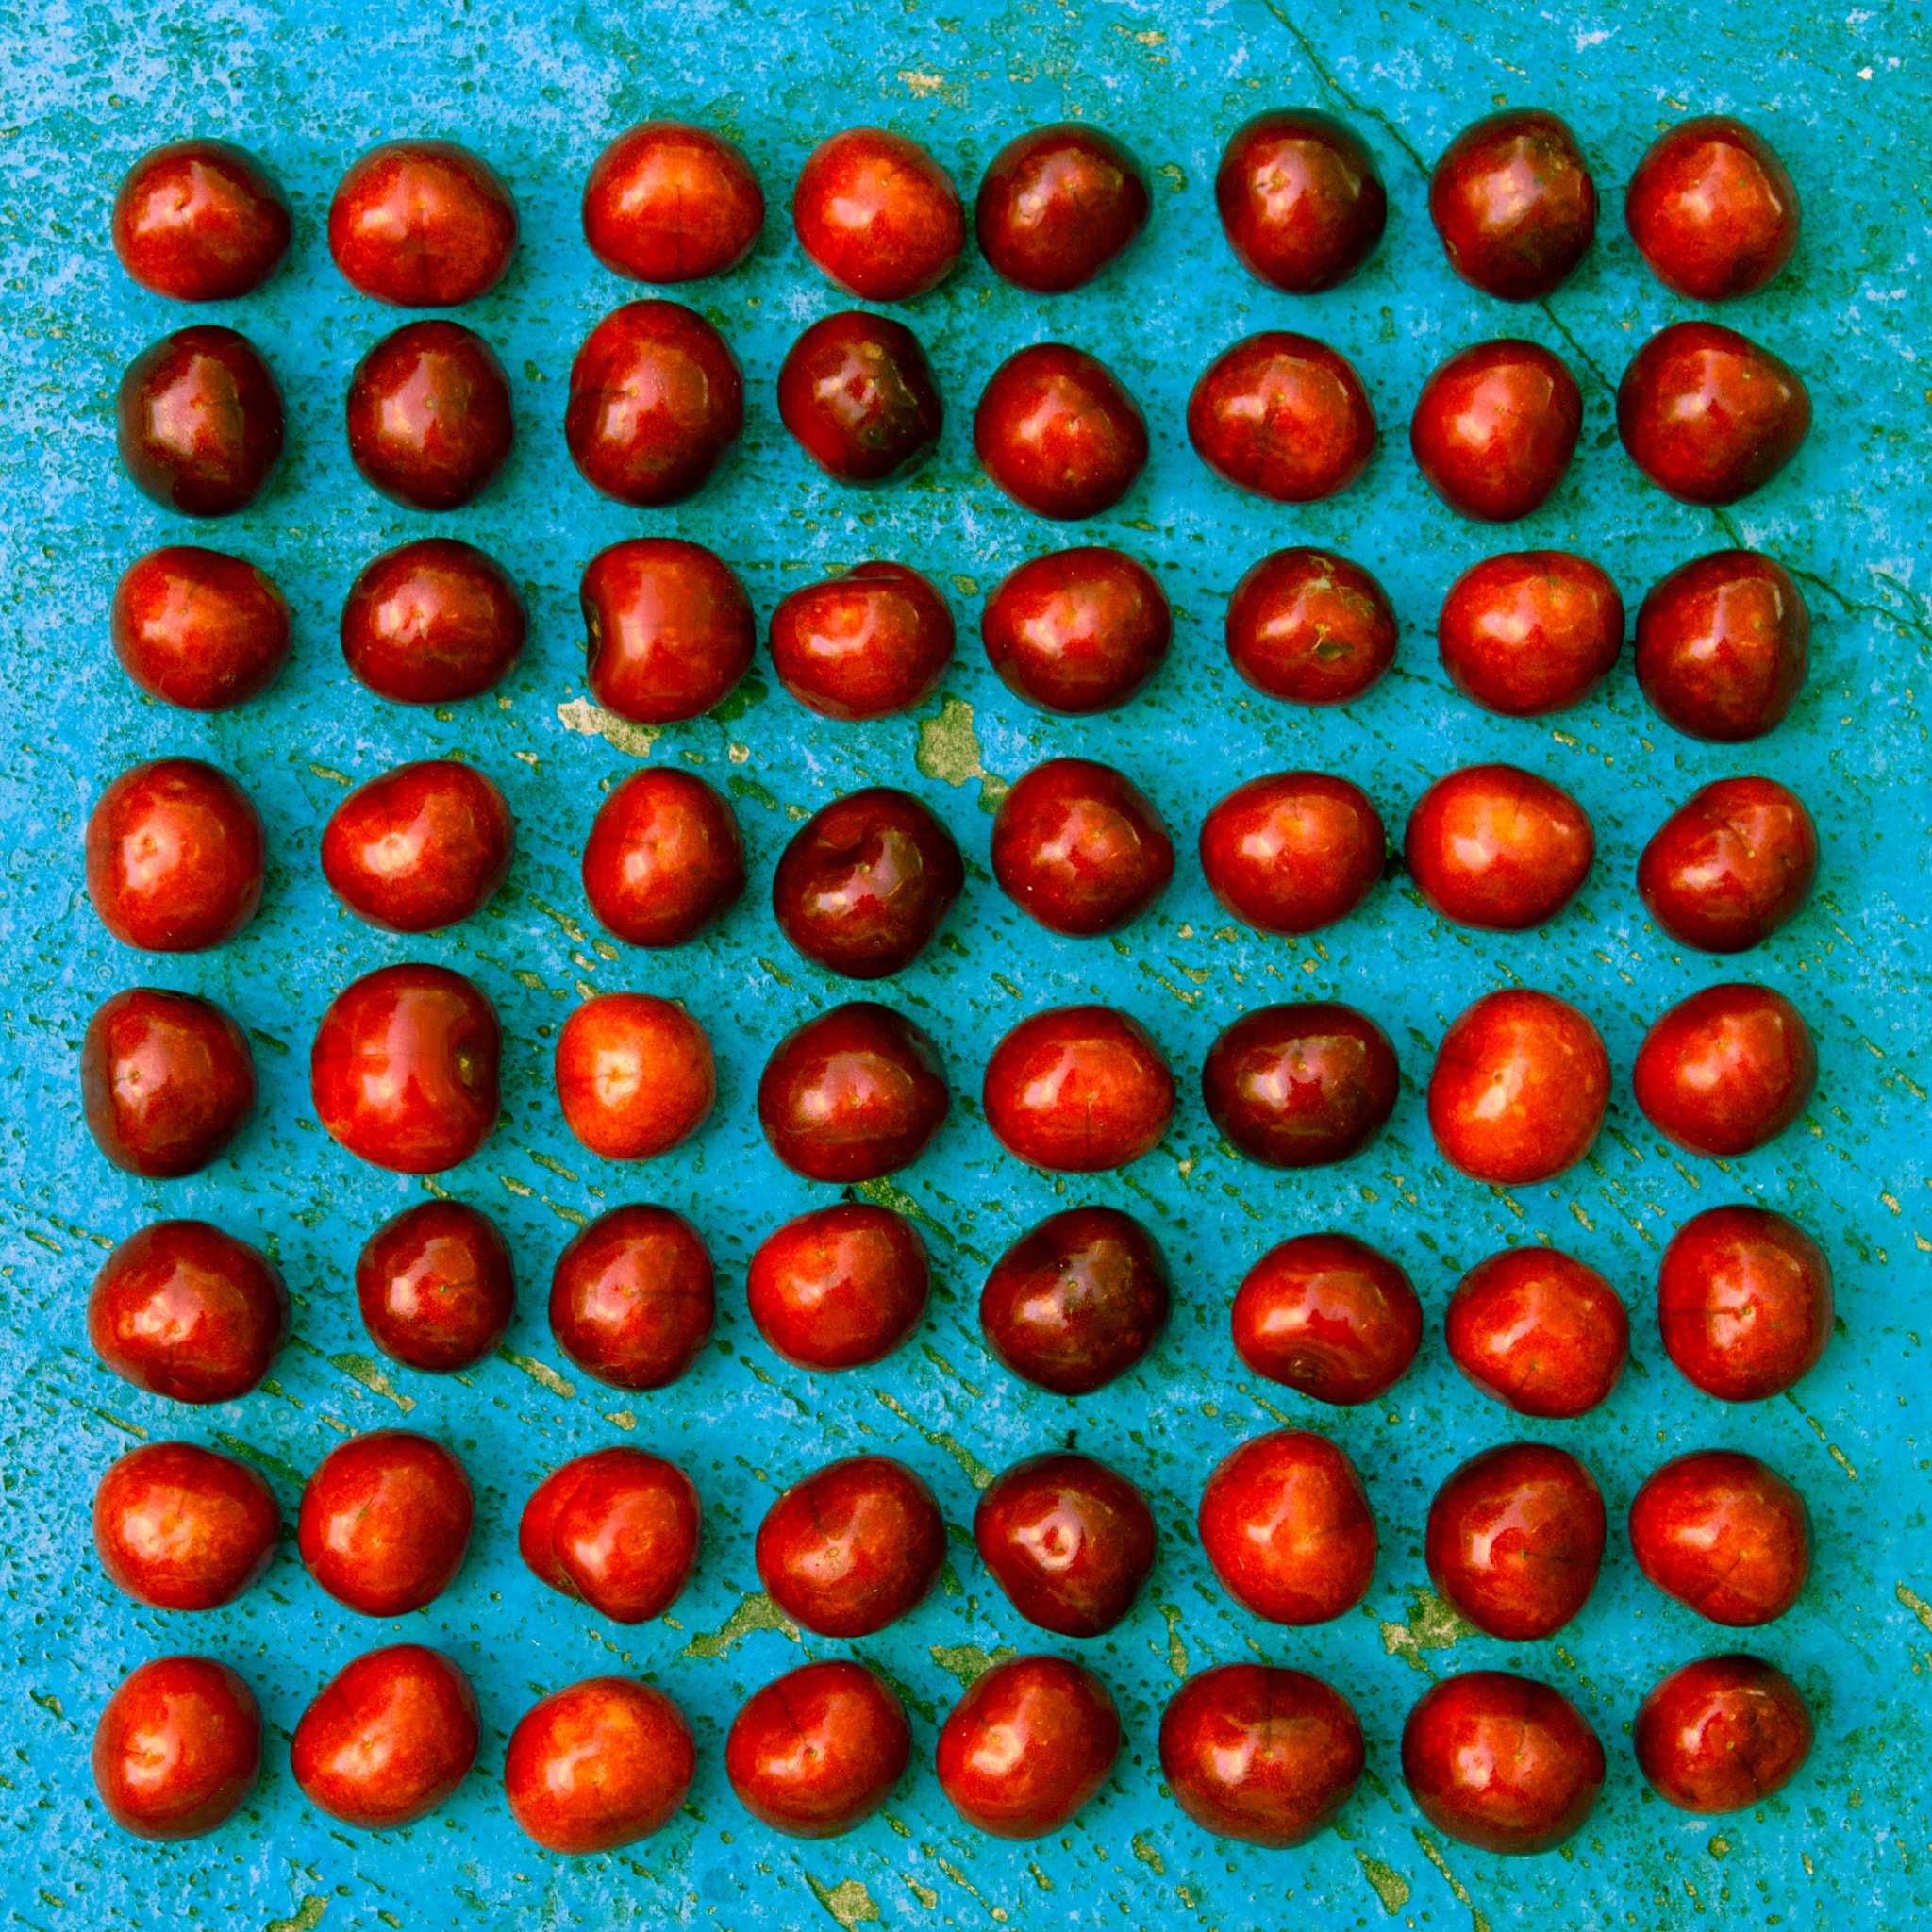 Nikon D2X + Nikon AF-S DX Nikkor 17-55mm F2.8G ED-IF sample photo. Square arrangement of ripe cherries on blue textrured background photography